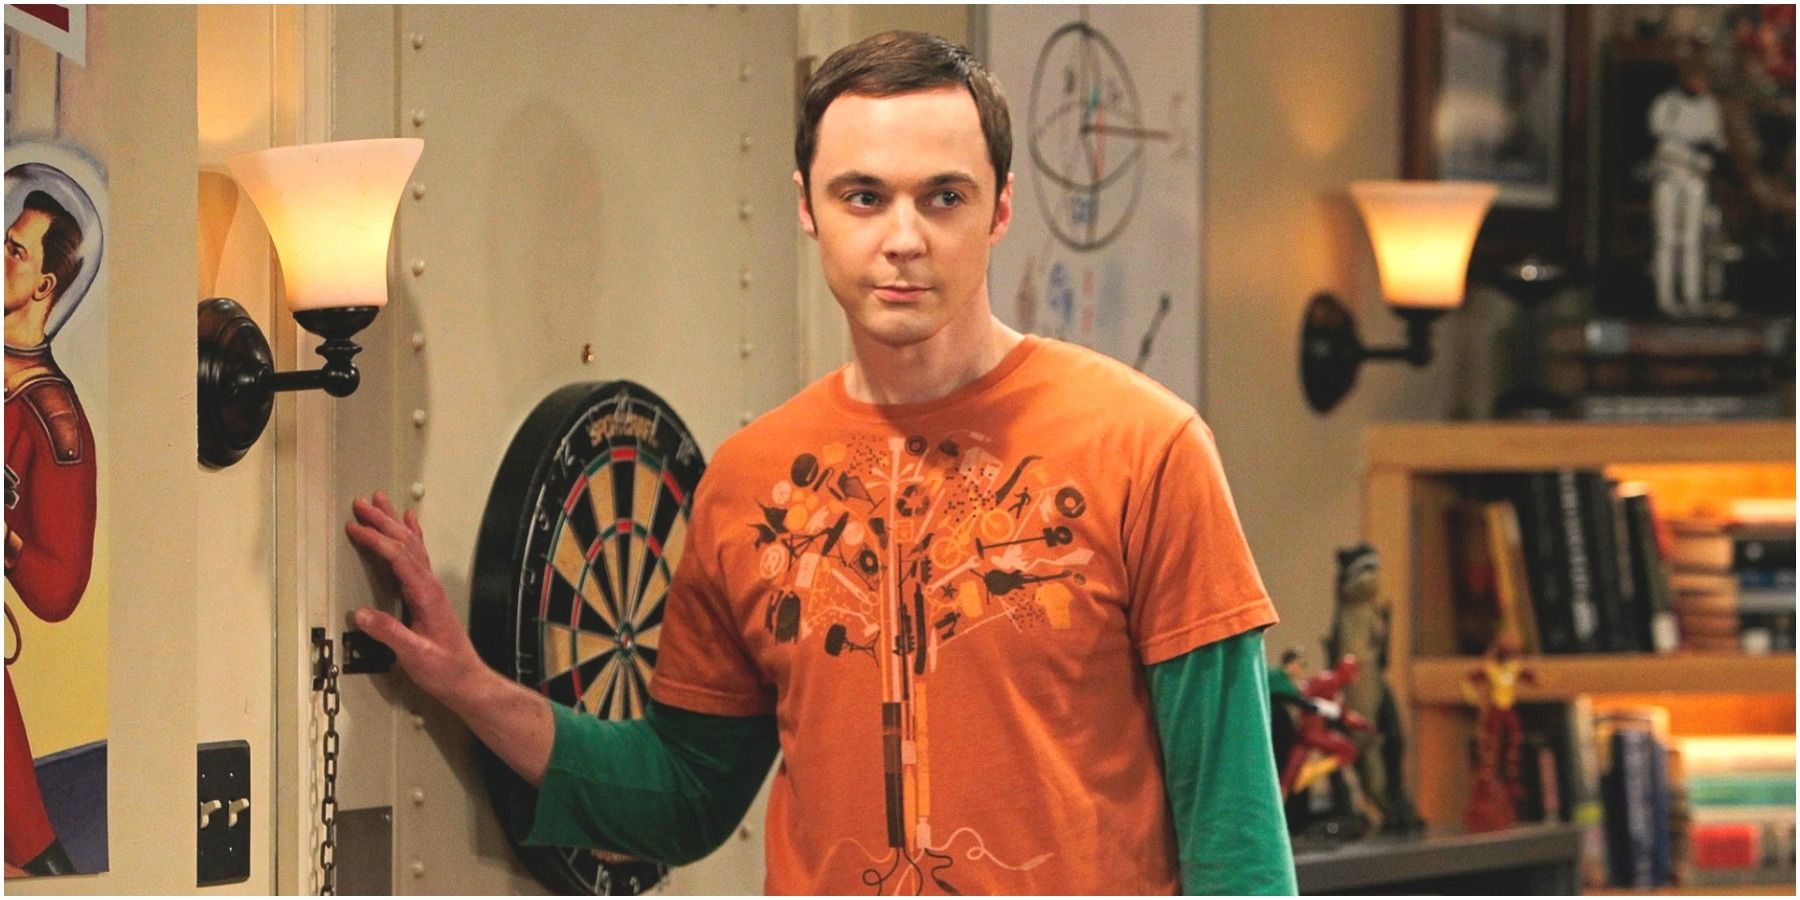 The Big Bang Theory's Sheldon Cooper, played by Jim Parsons, standing at his apartment door